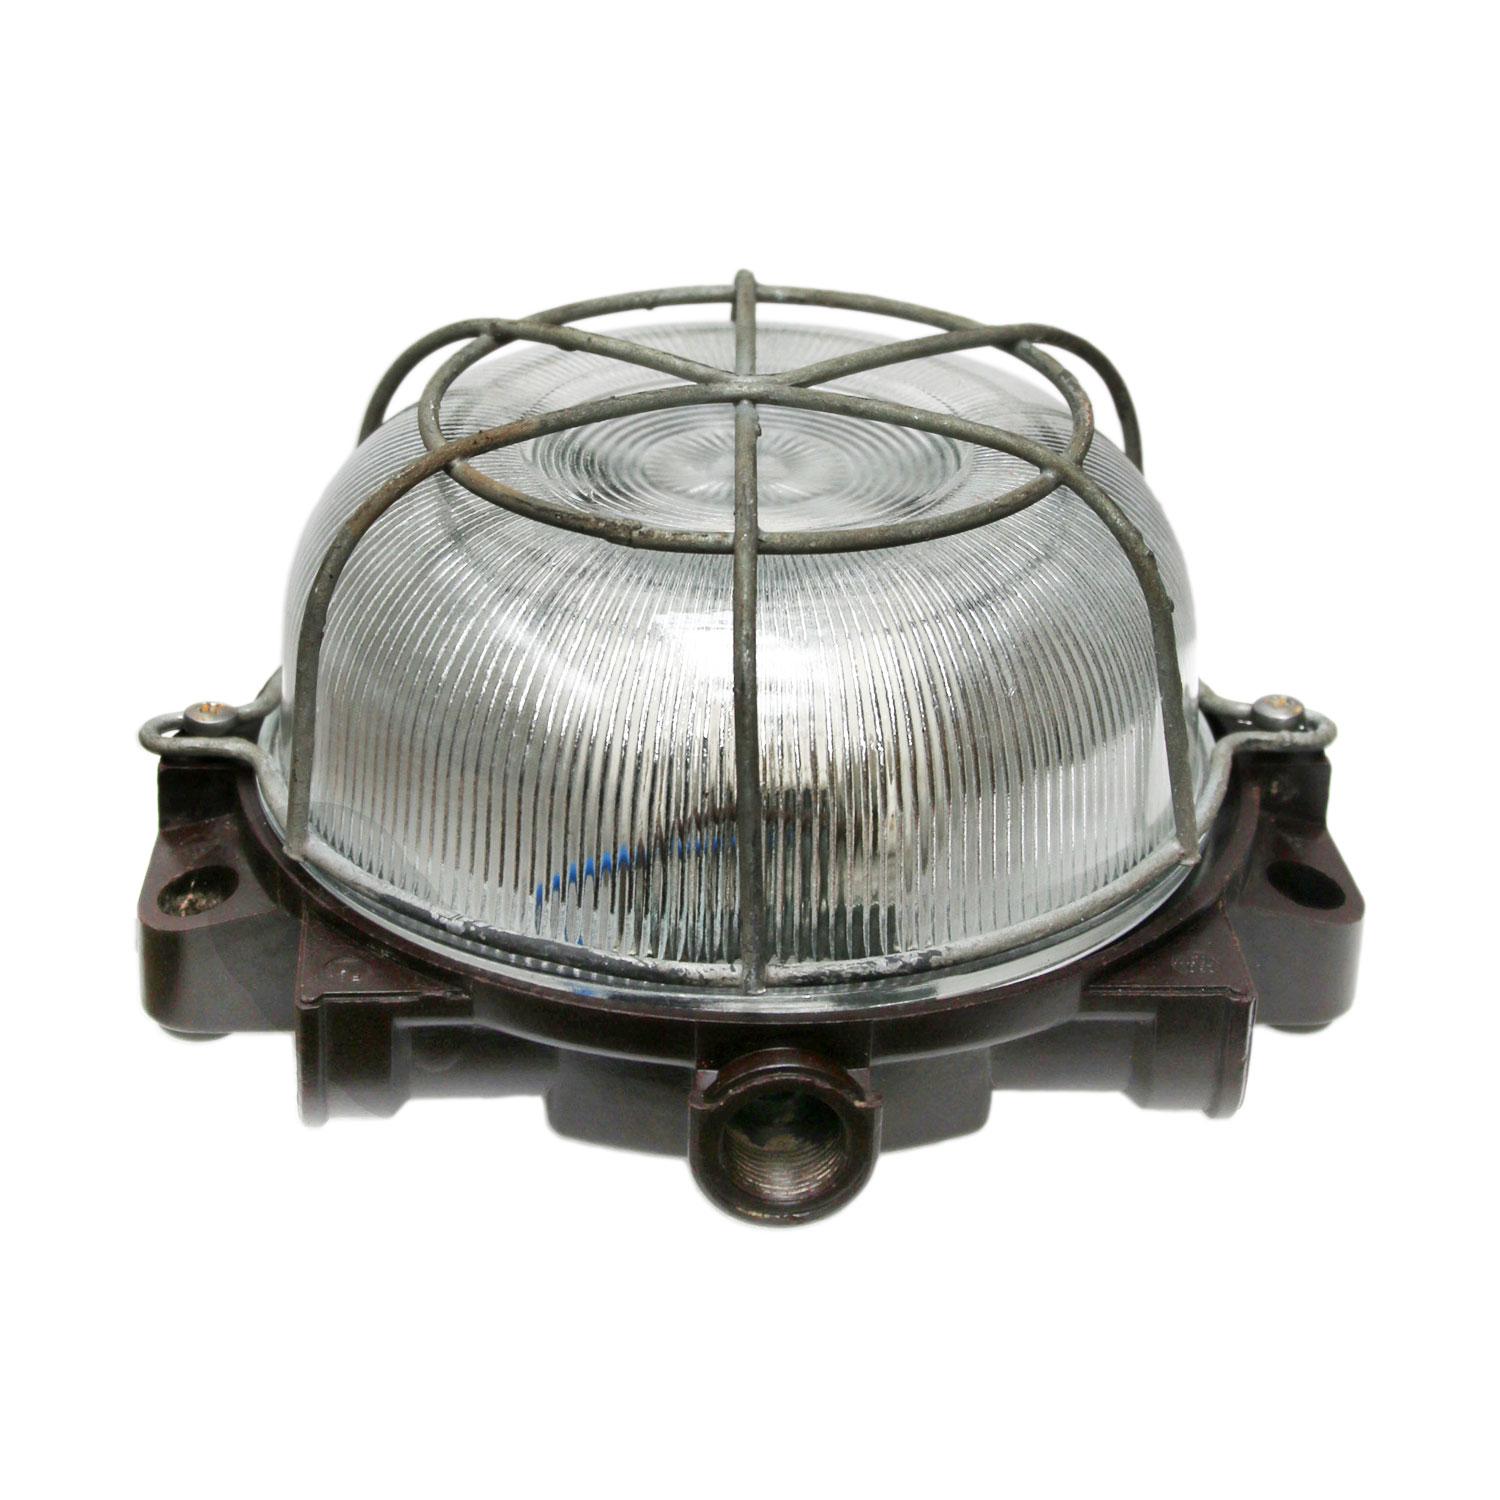 Industrial wall and ceiling scone. Bakelite back. Holophane striped glass.
Metal frame.

Measure: Weight 1.0 kg / 2.2 lb

Priced individual item. All lamps have been made suitable by international standards for incandescent light bulbs,